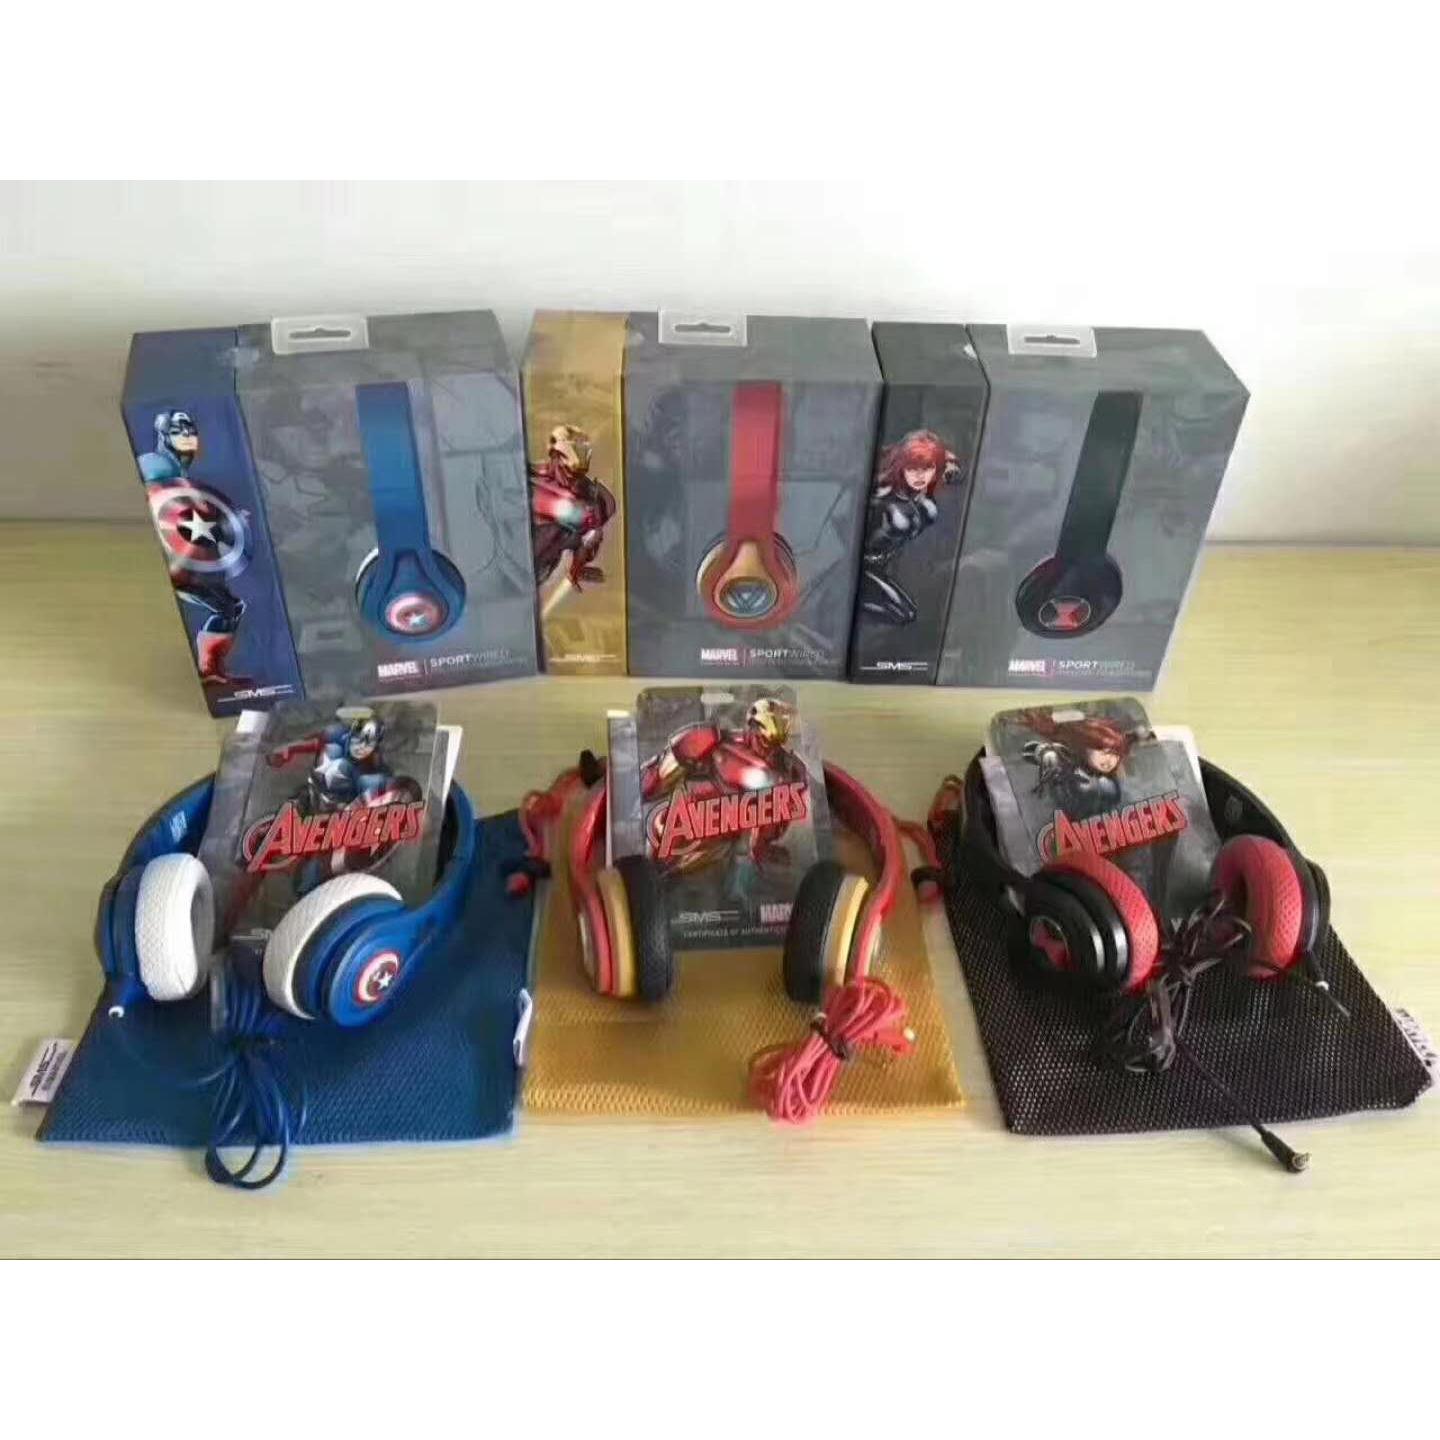 OEM Original SMS Audio headsets Wholesale Suppliers